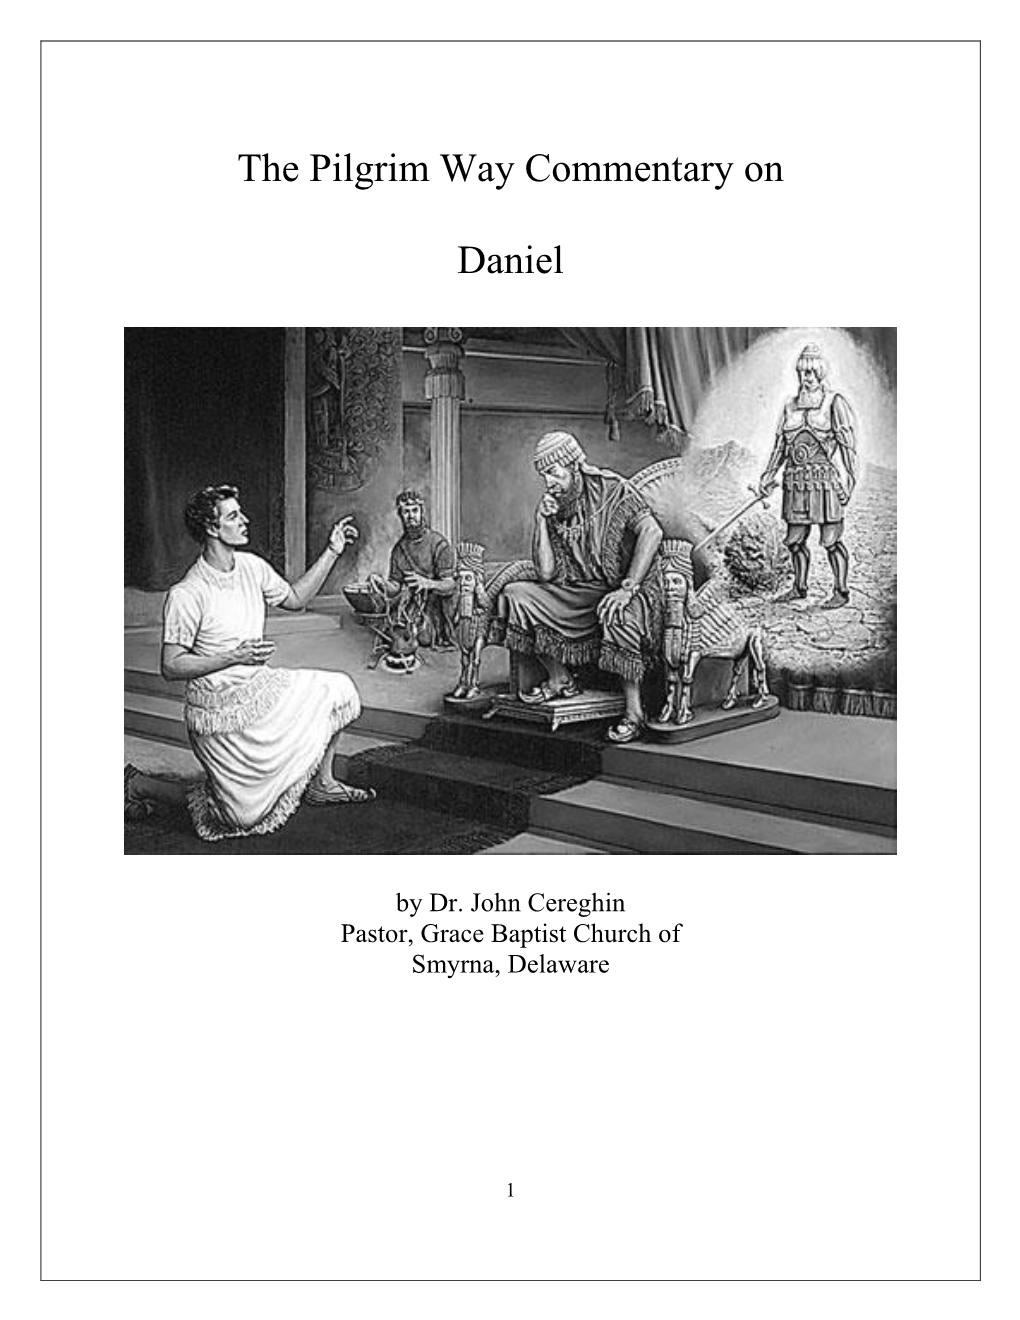 The Pilgrim Way Commentary on Daniel by Dr